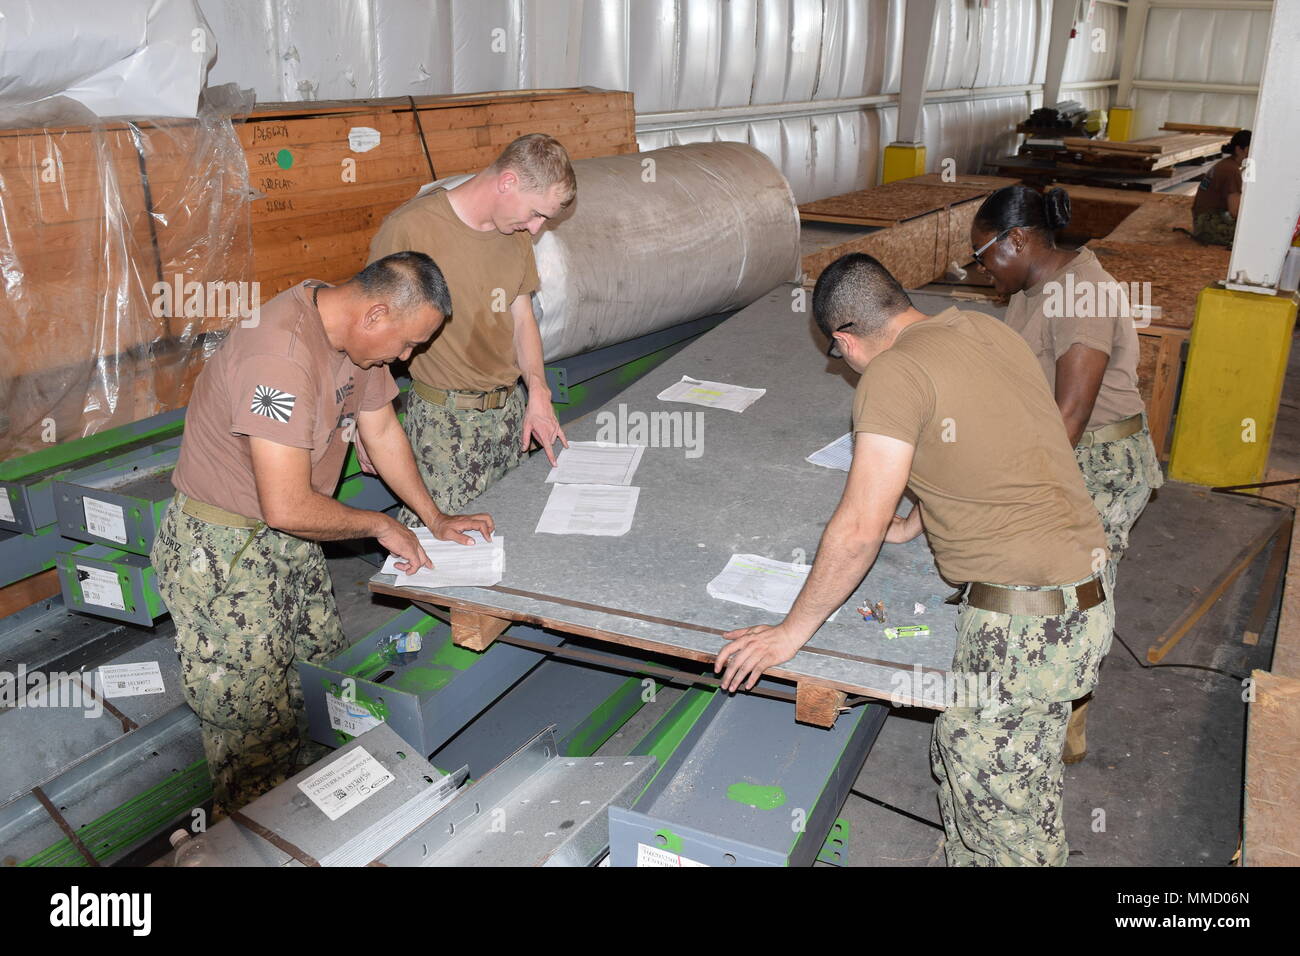 171010-N-NO181-082 DIEGO GARCIA, British Indian Ocean Territory (Oct. 10,  2017) – (Left to right) Construction Electrician 1st Class Gilbert Valdriz  from Beaumont, Calif.; Steelworker 2nd Class Joshua Schmidt from Bellmont,  NY; Equipment